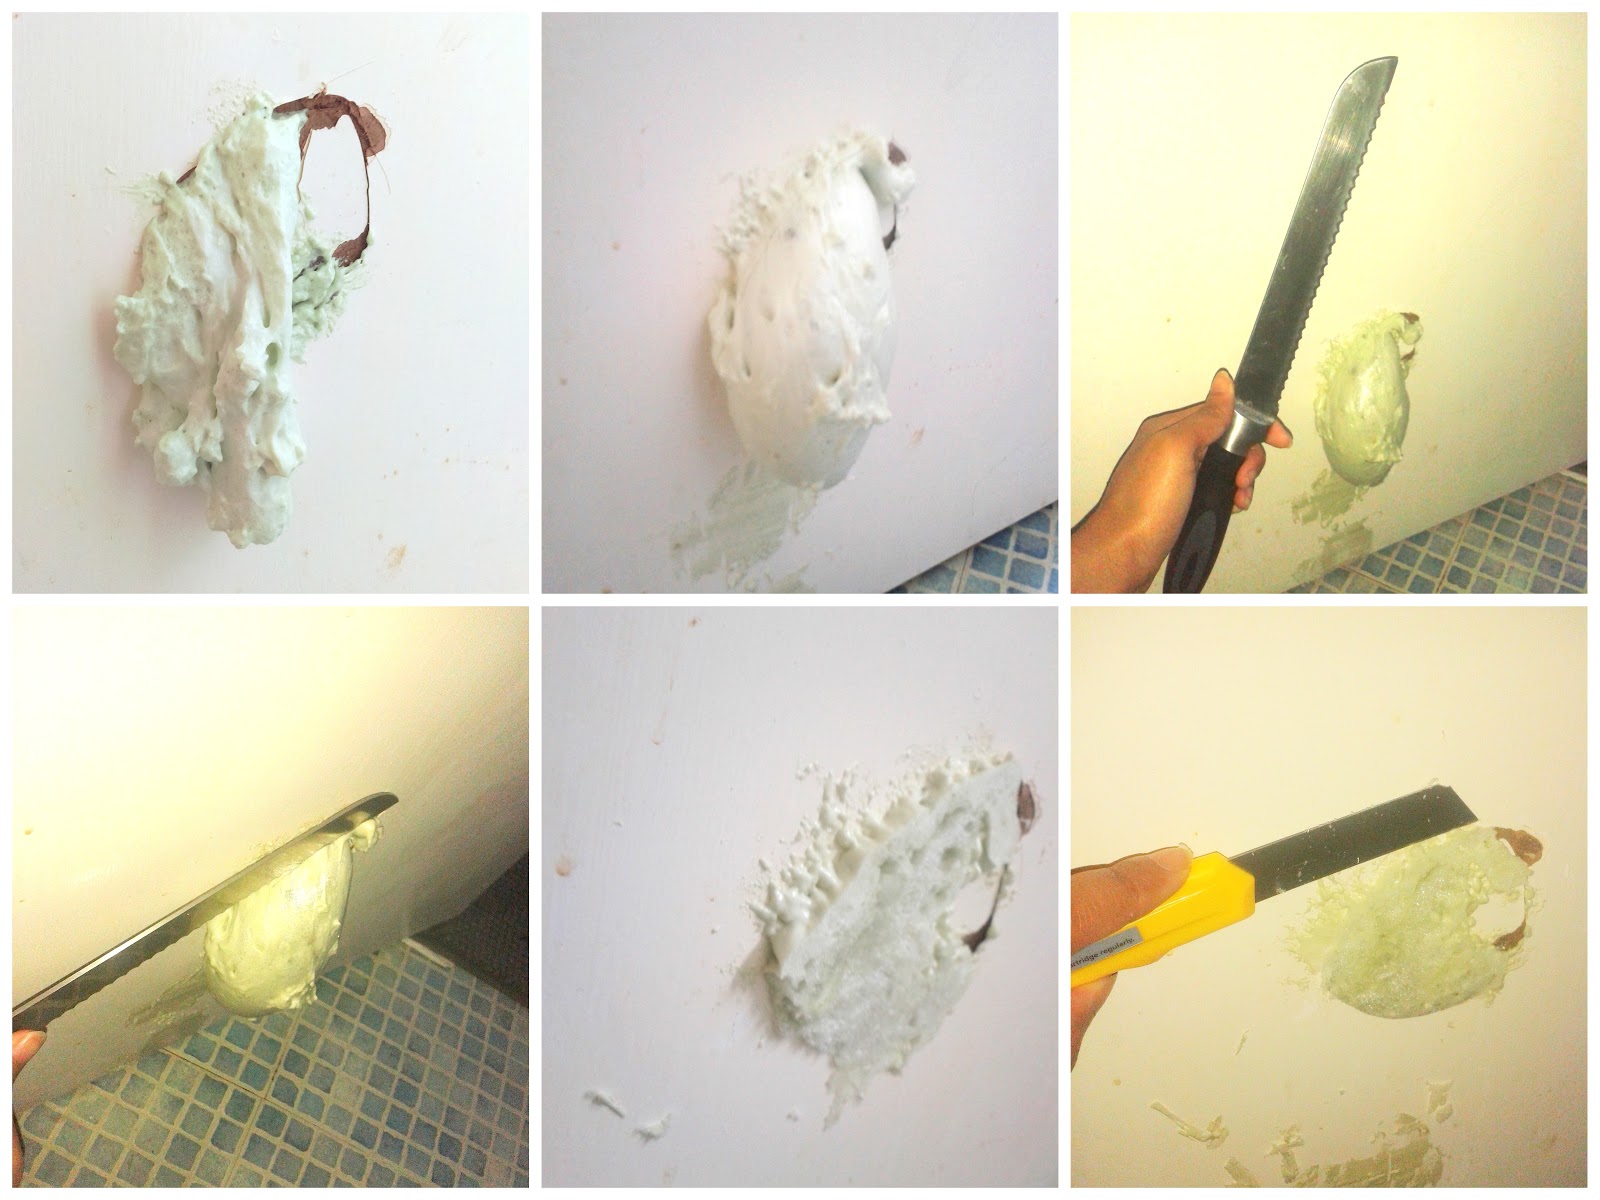 Home DIY: How to fix hole in a hollow door